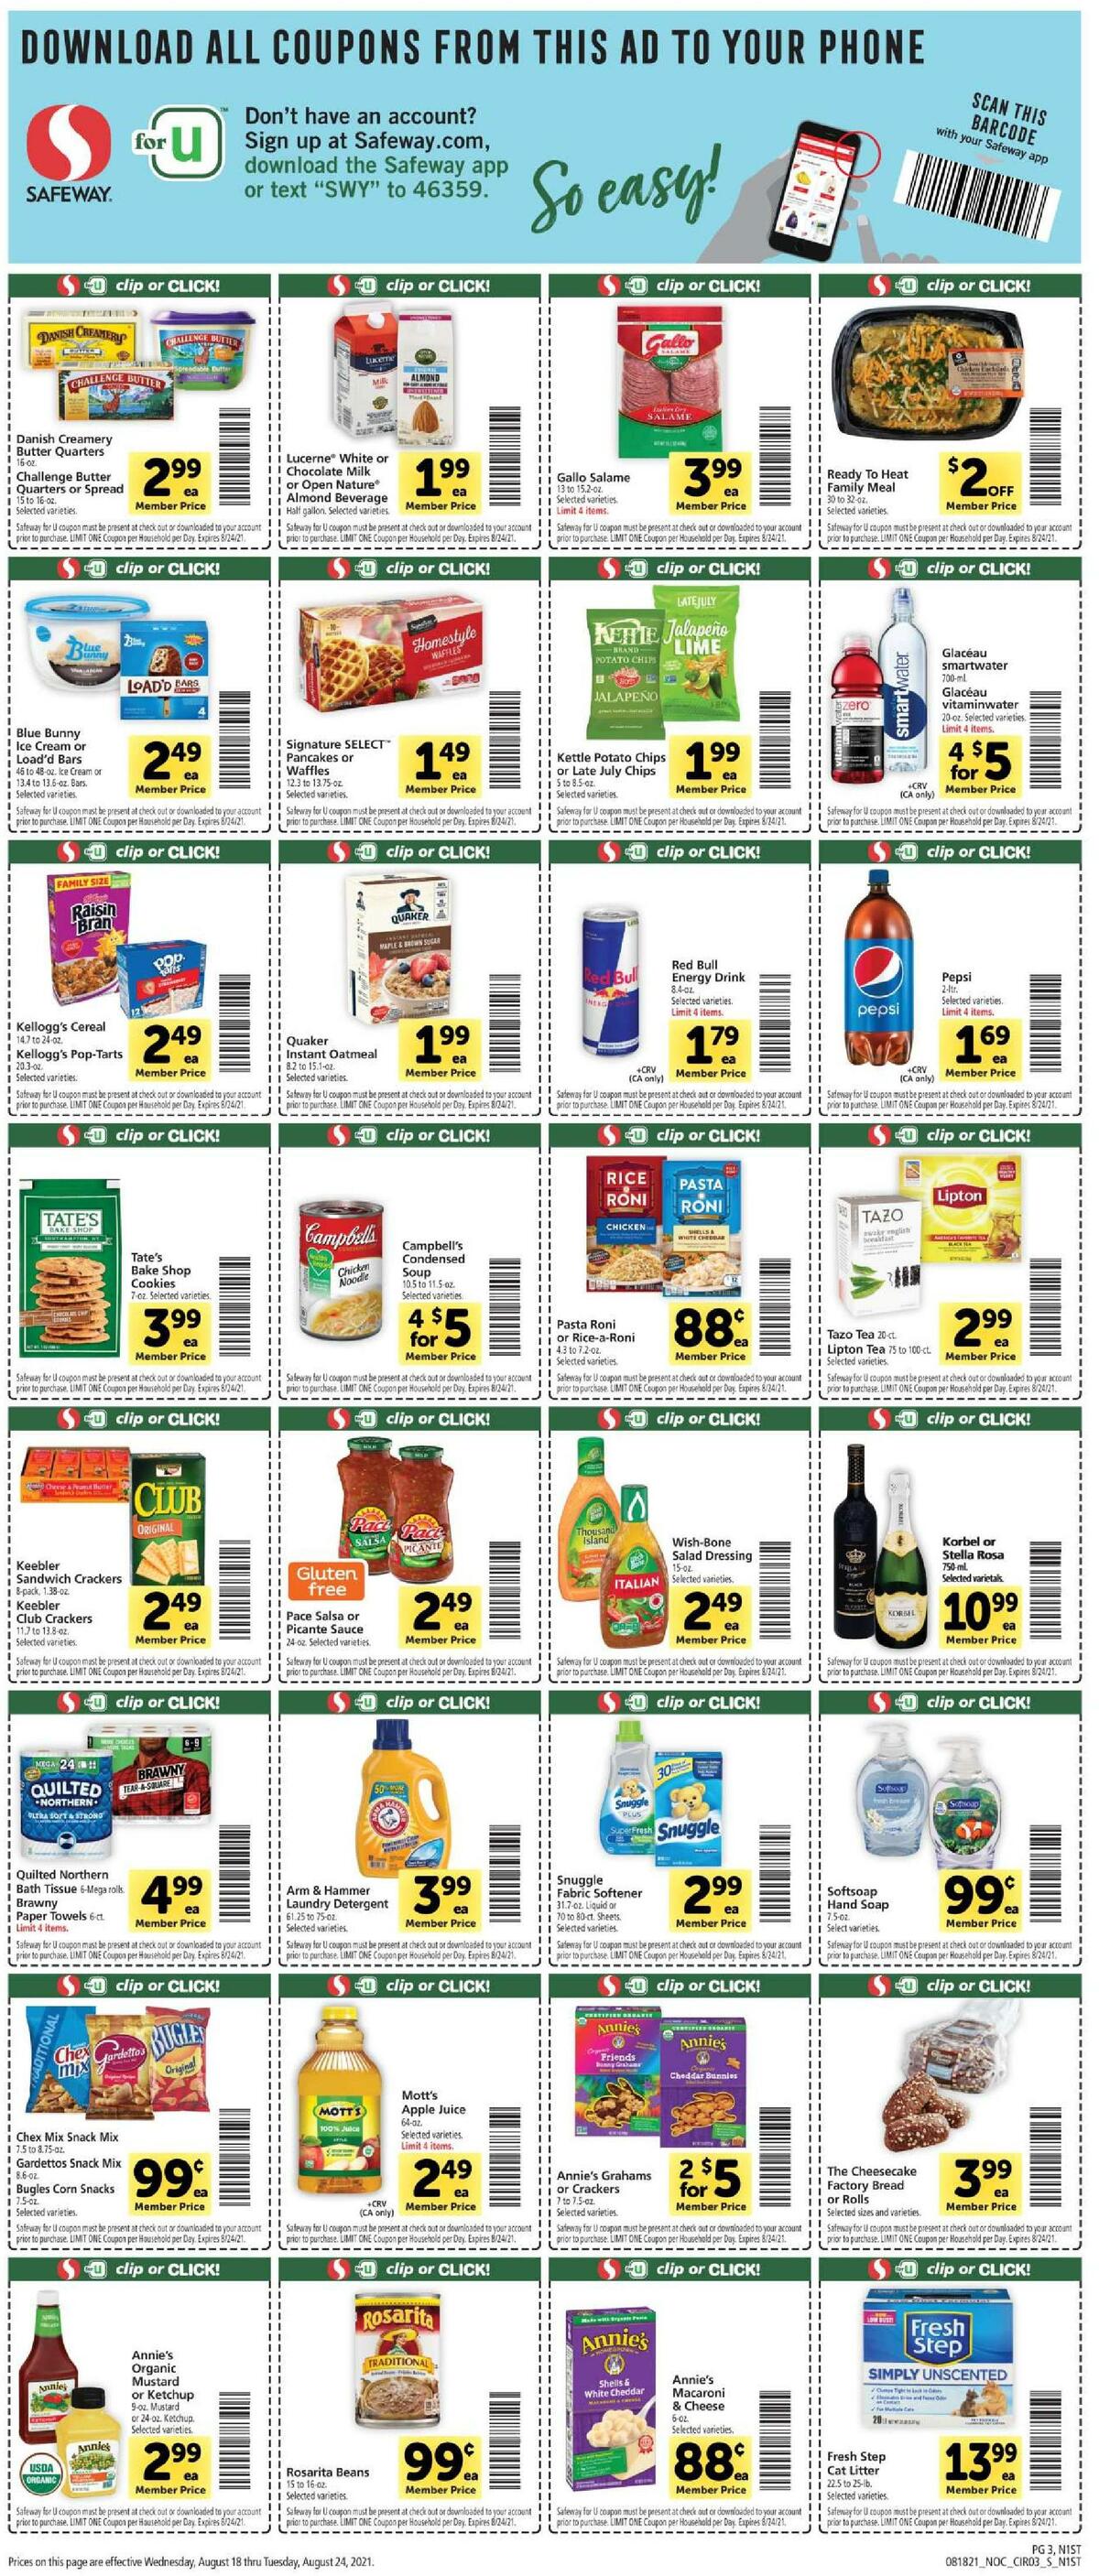 Safeway Weekly Ad from August 18